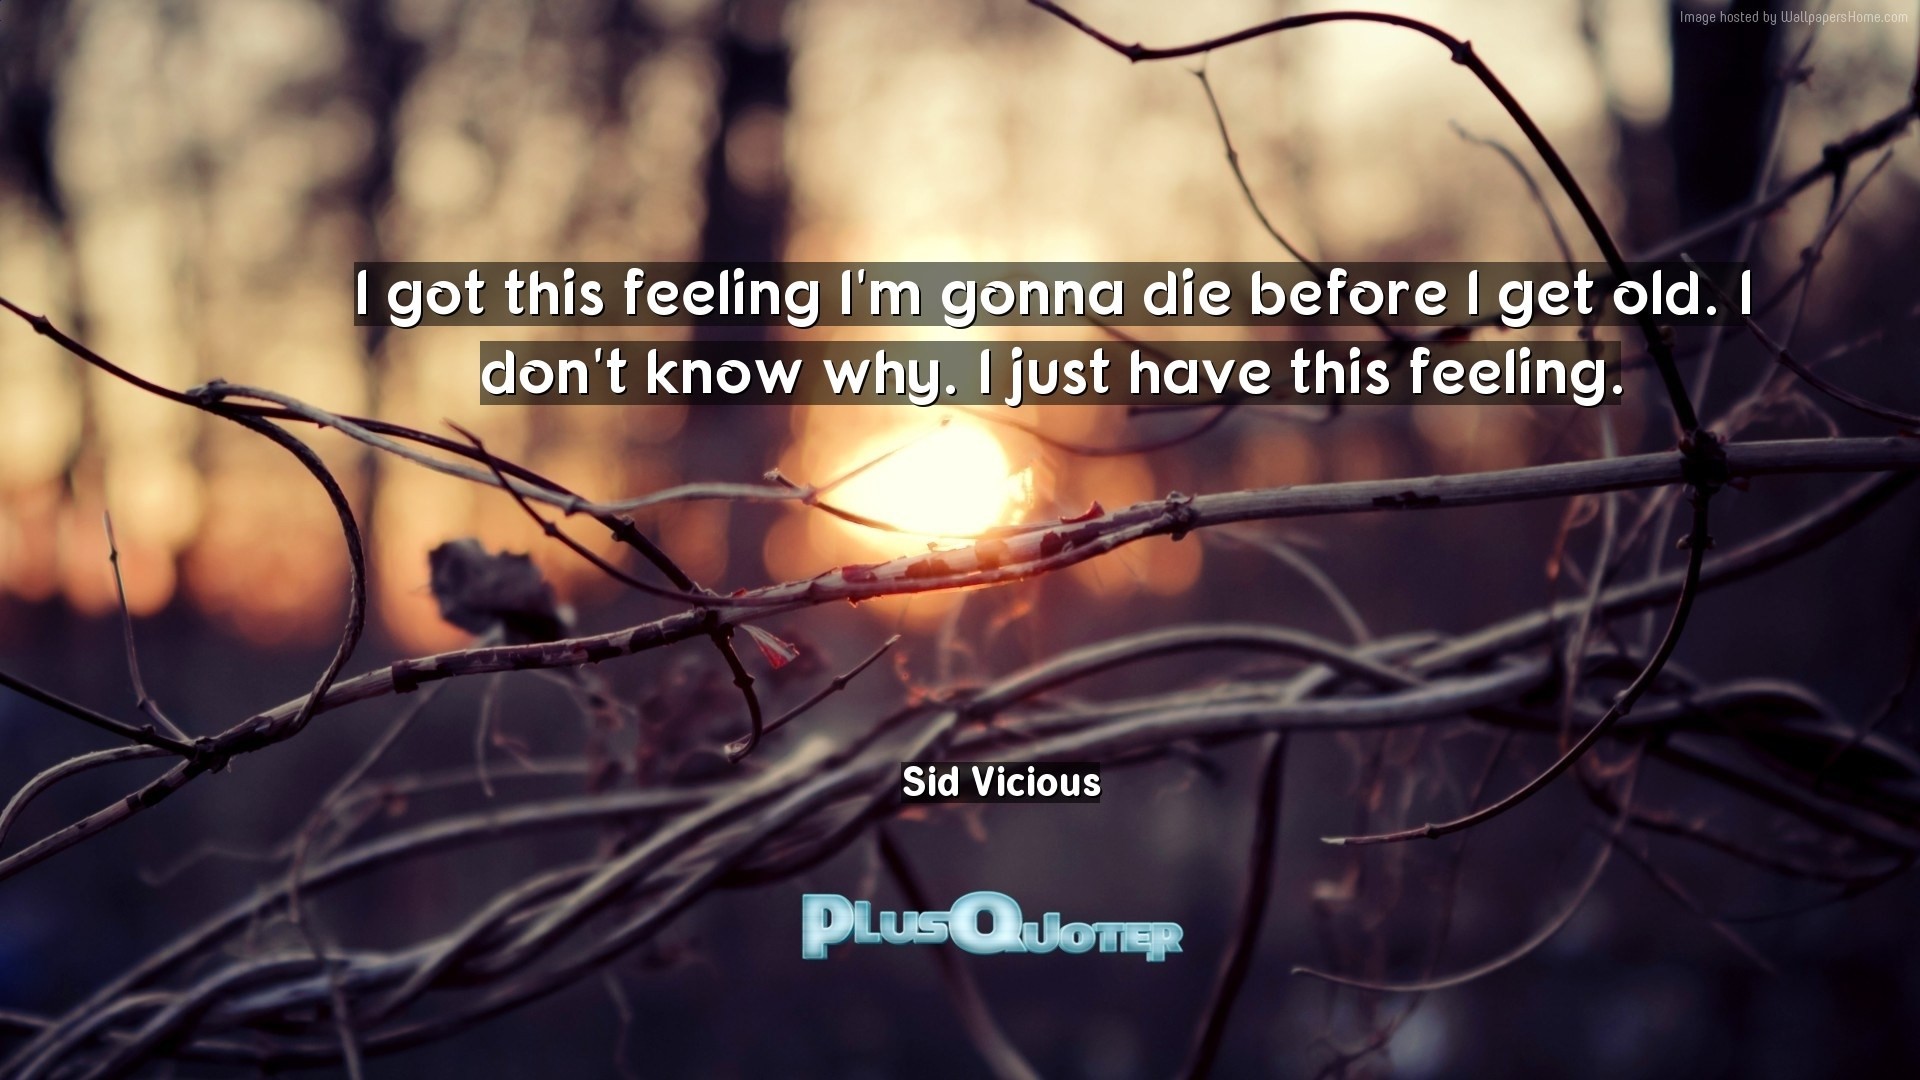 1920x1080 Download Wallpaper with inspirational Quotes- "I got this feeling I